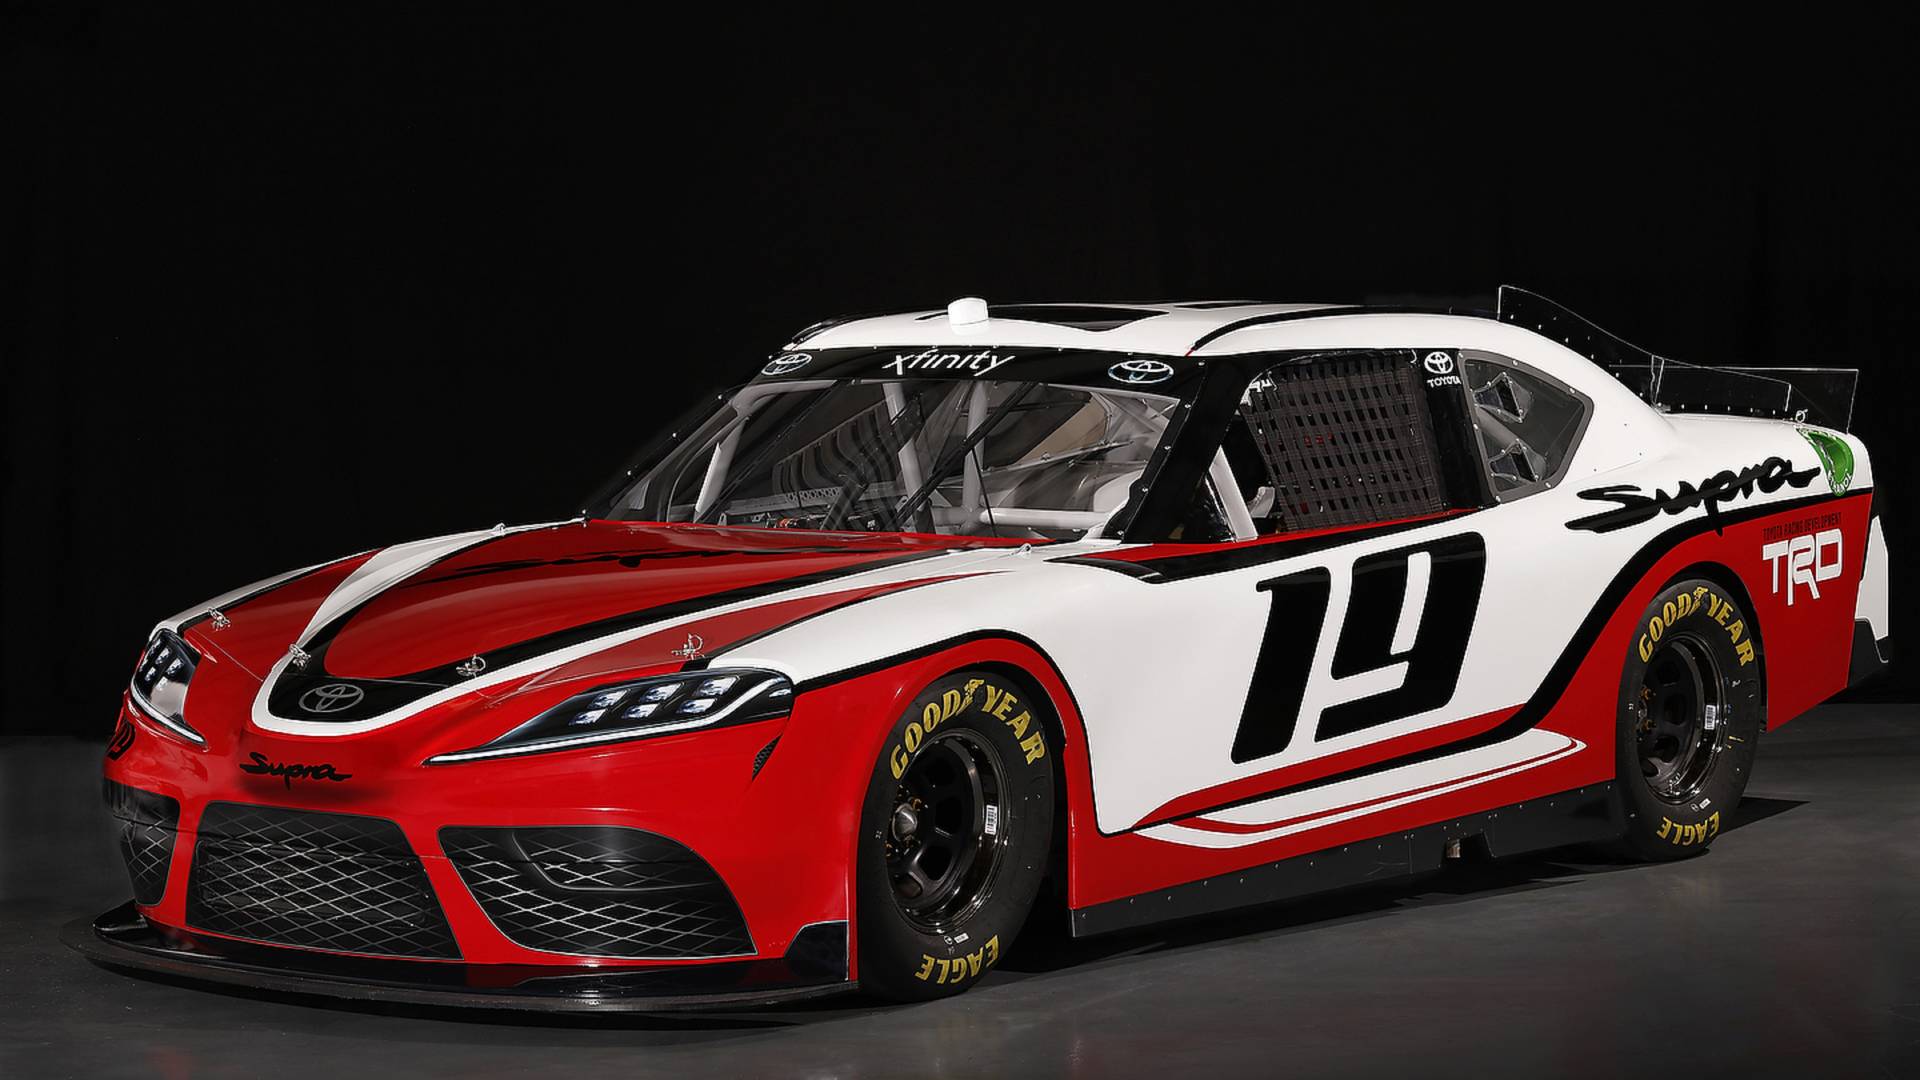 Toyota's Supra to replace Camry in the NASCAR Xfinity Series